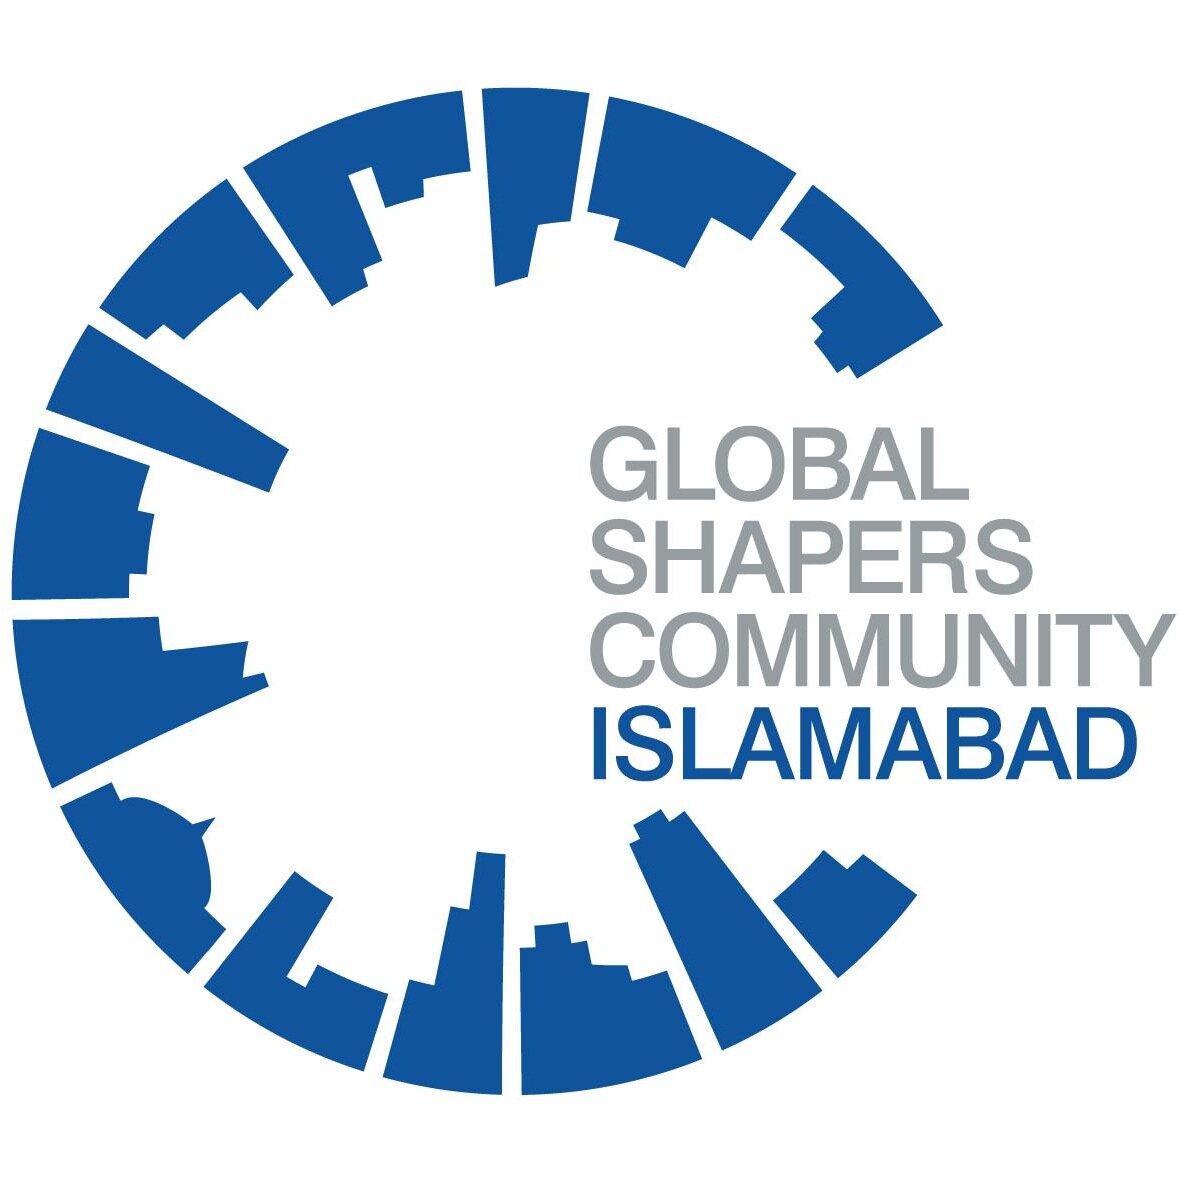 The #Islamabad hub of @GlobalShapers #Pakistan community of @WEF. Part of a global platform of young people shaping the world's future.